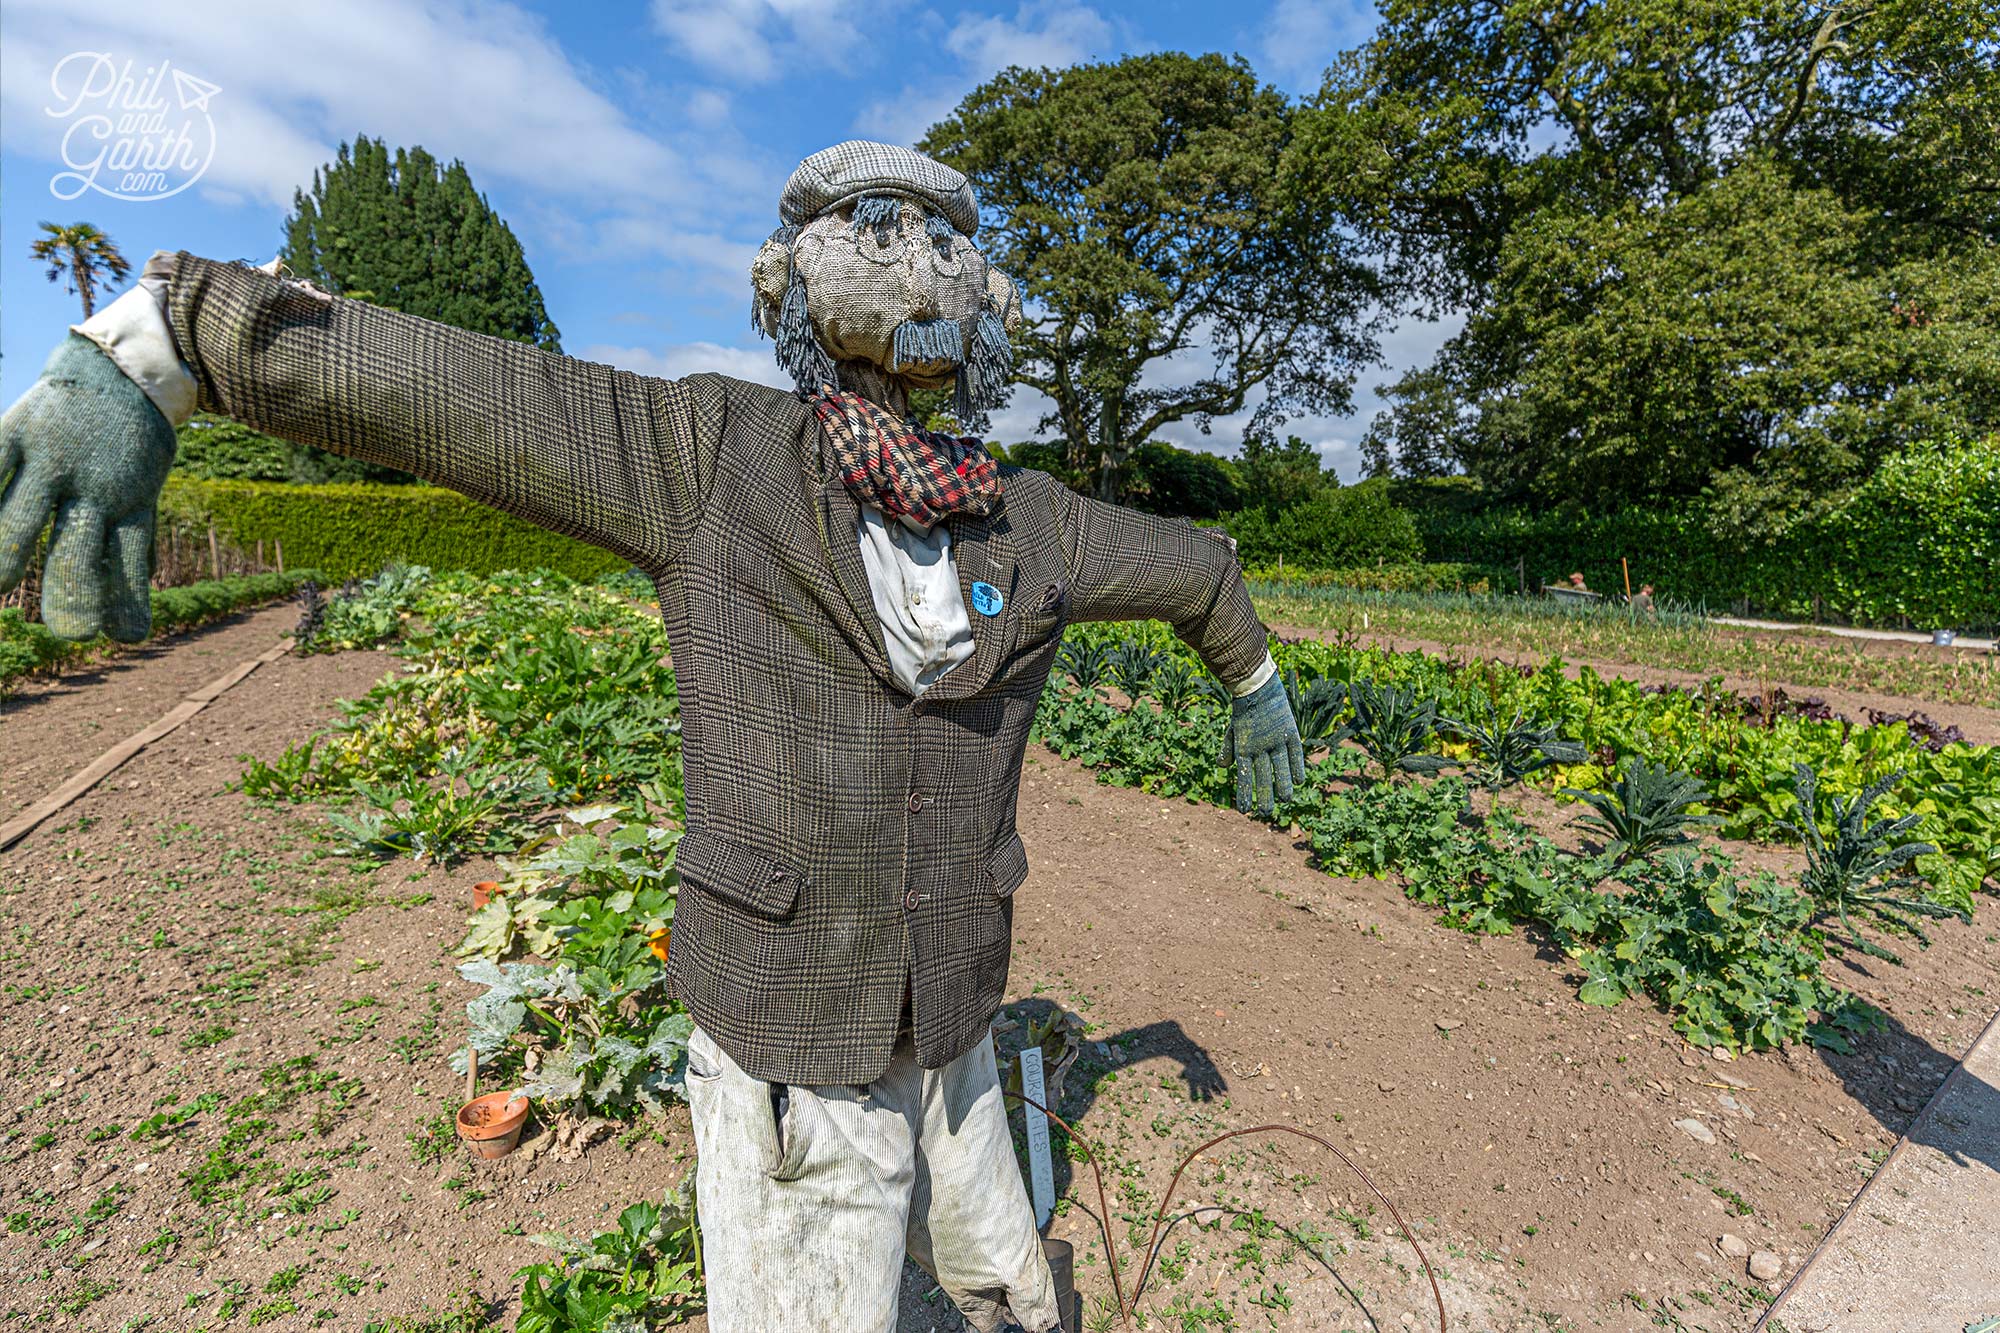 Diggory the scarecrow looking after the fresh seasonal produce for Heligan's Cafes and Restaurant